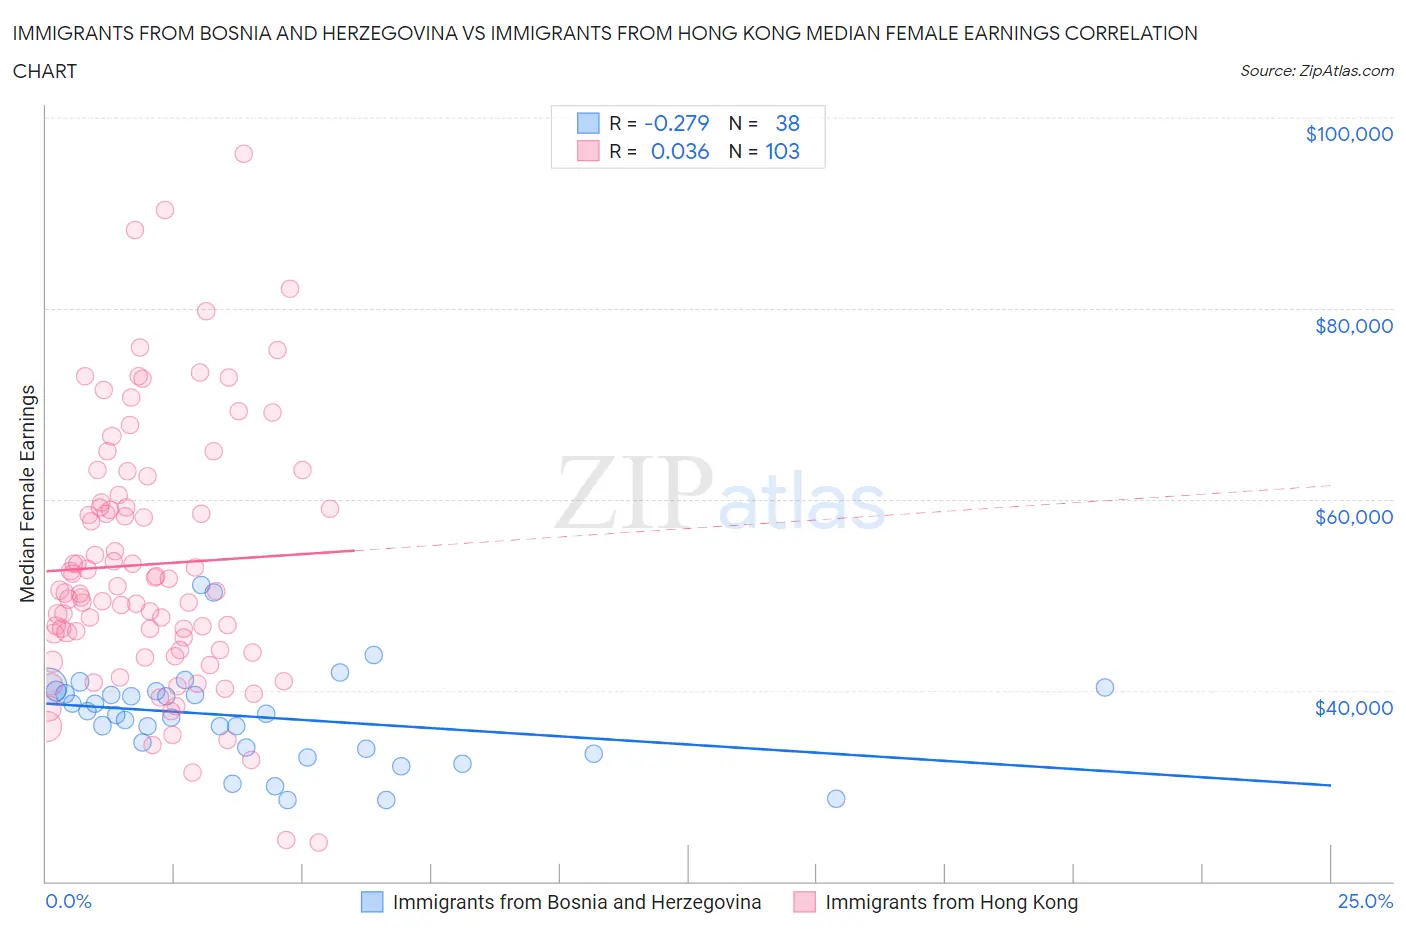 Immigrants from Bosnia and Herzegovina vs Immigrants from Hong Kong Median Female Earnings